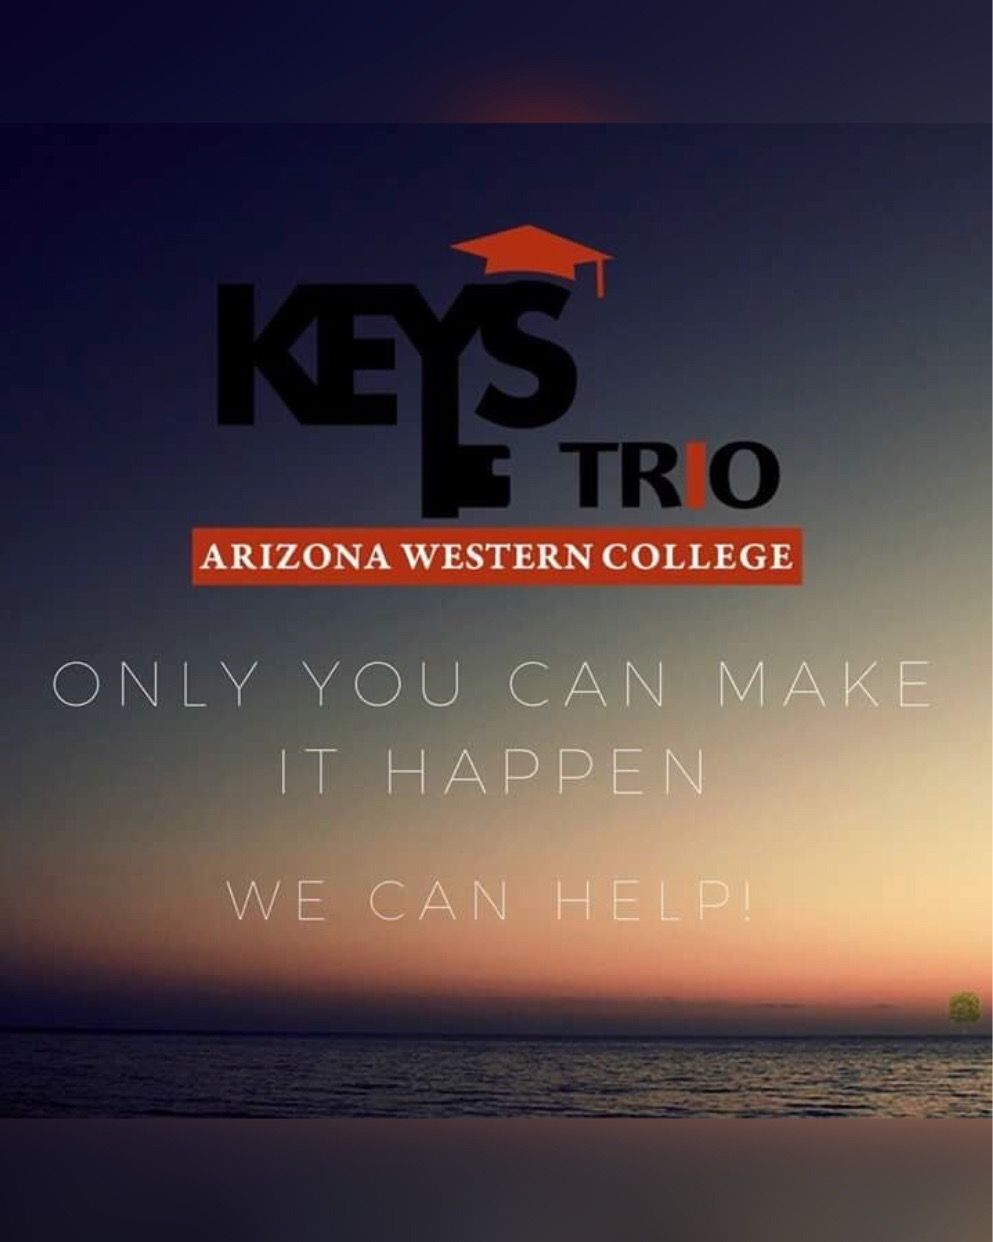 graphic of the KEYS/TRIO program with the phrase "Only you can make it happen. We can help!" over an ocean.